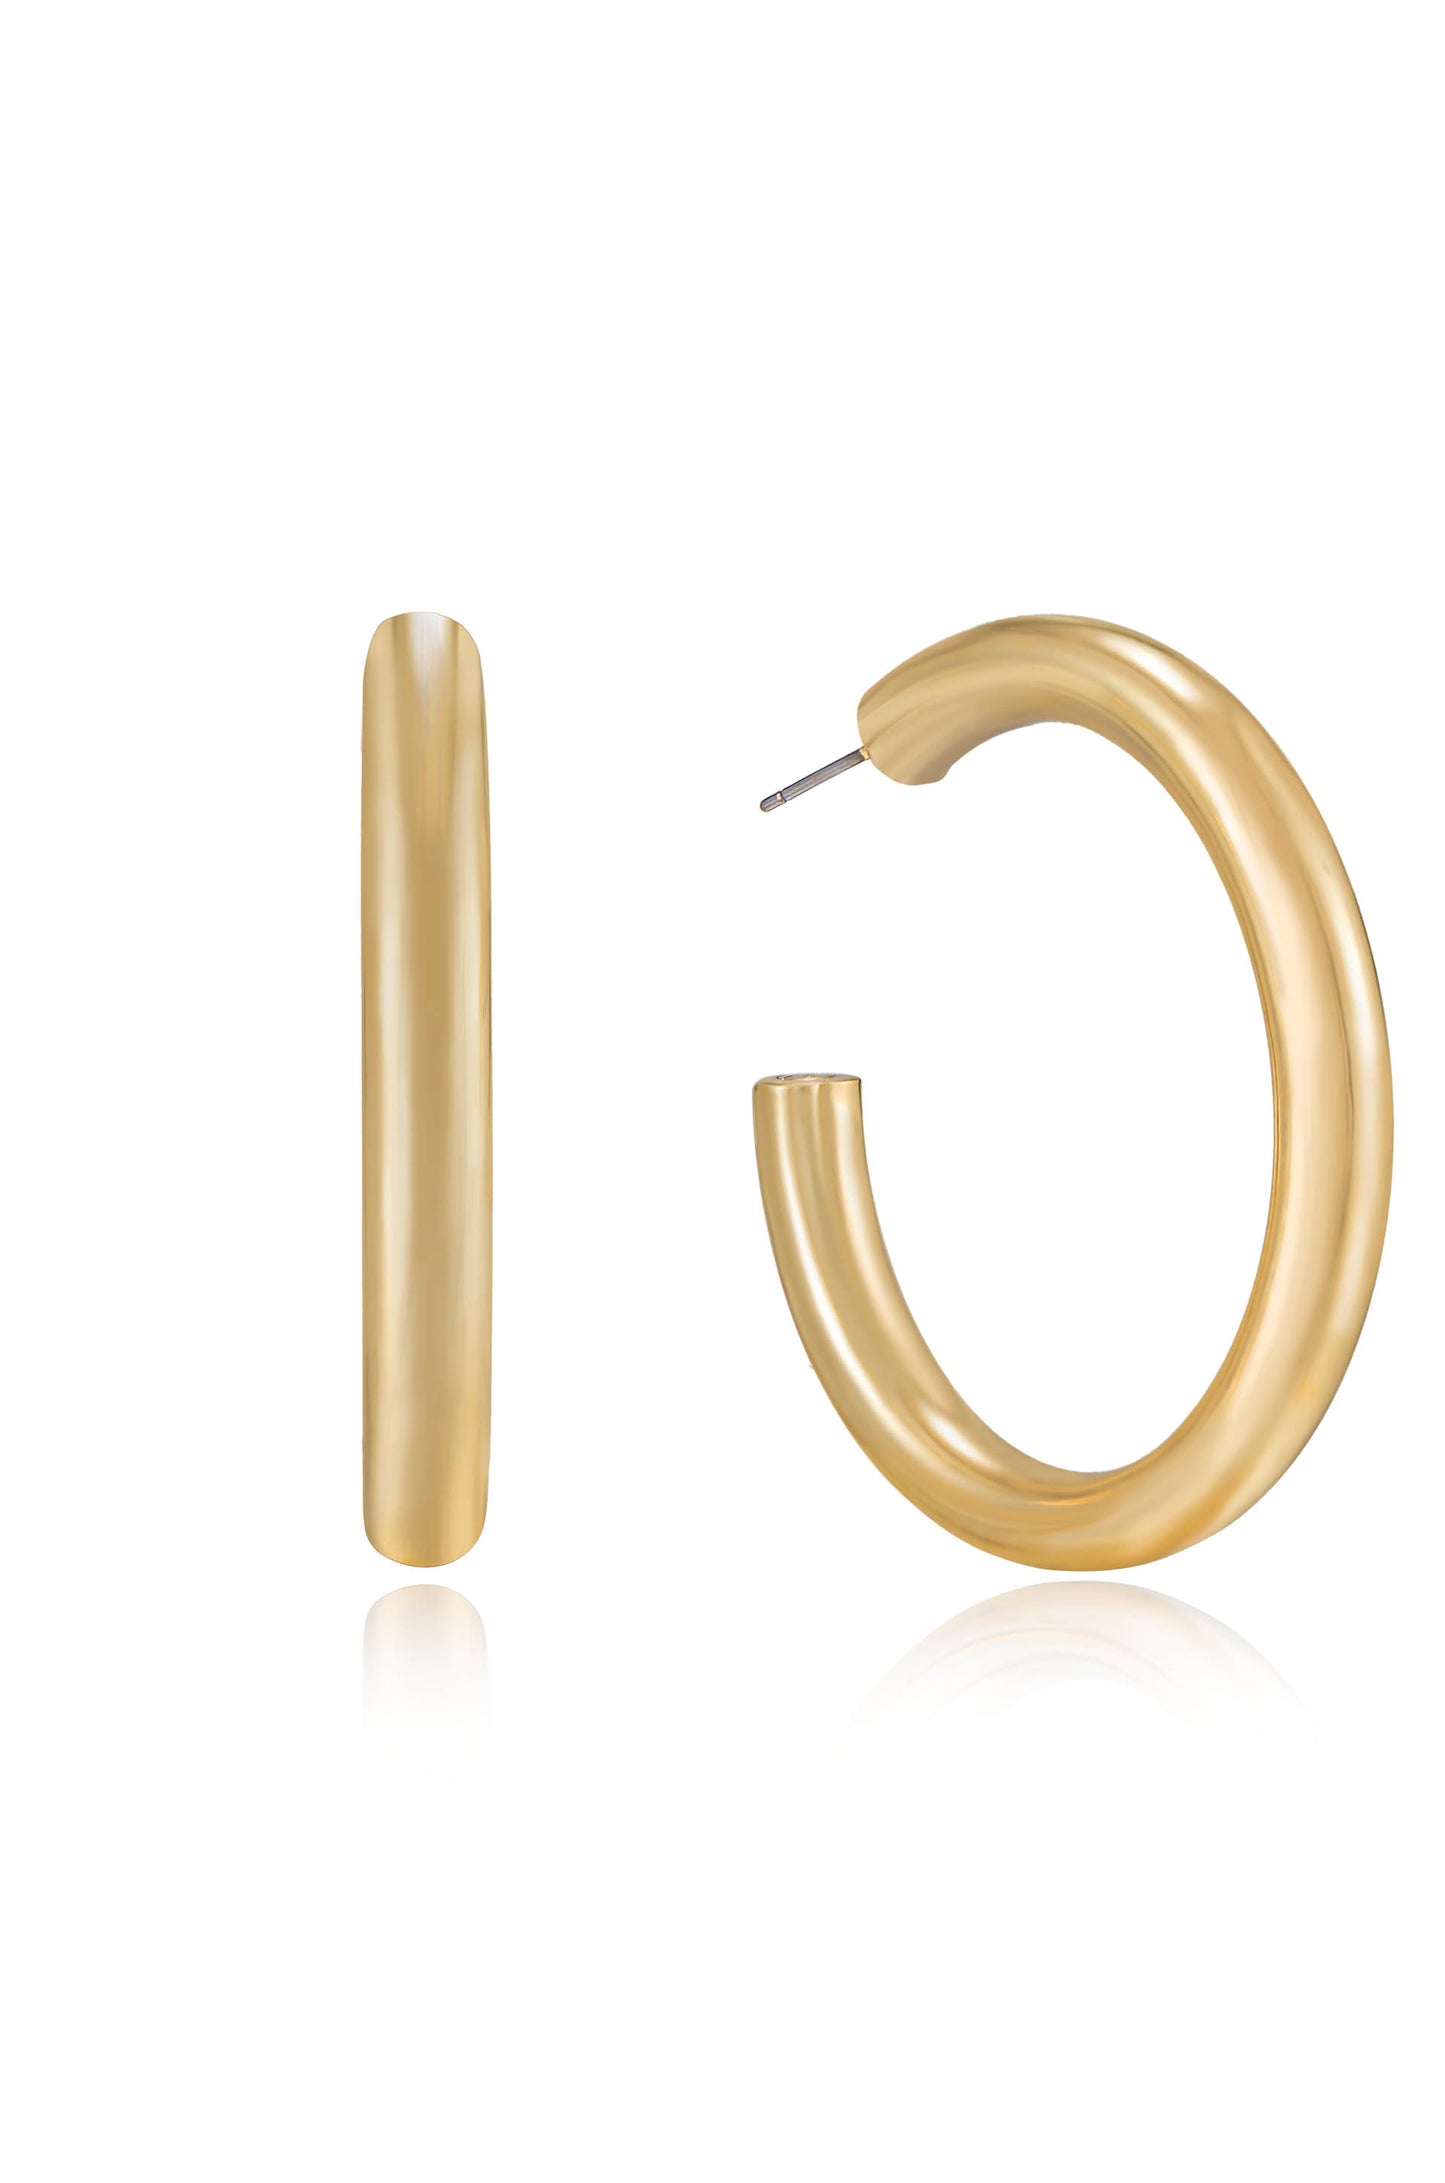 Thick Classic Hoops in large in gold